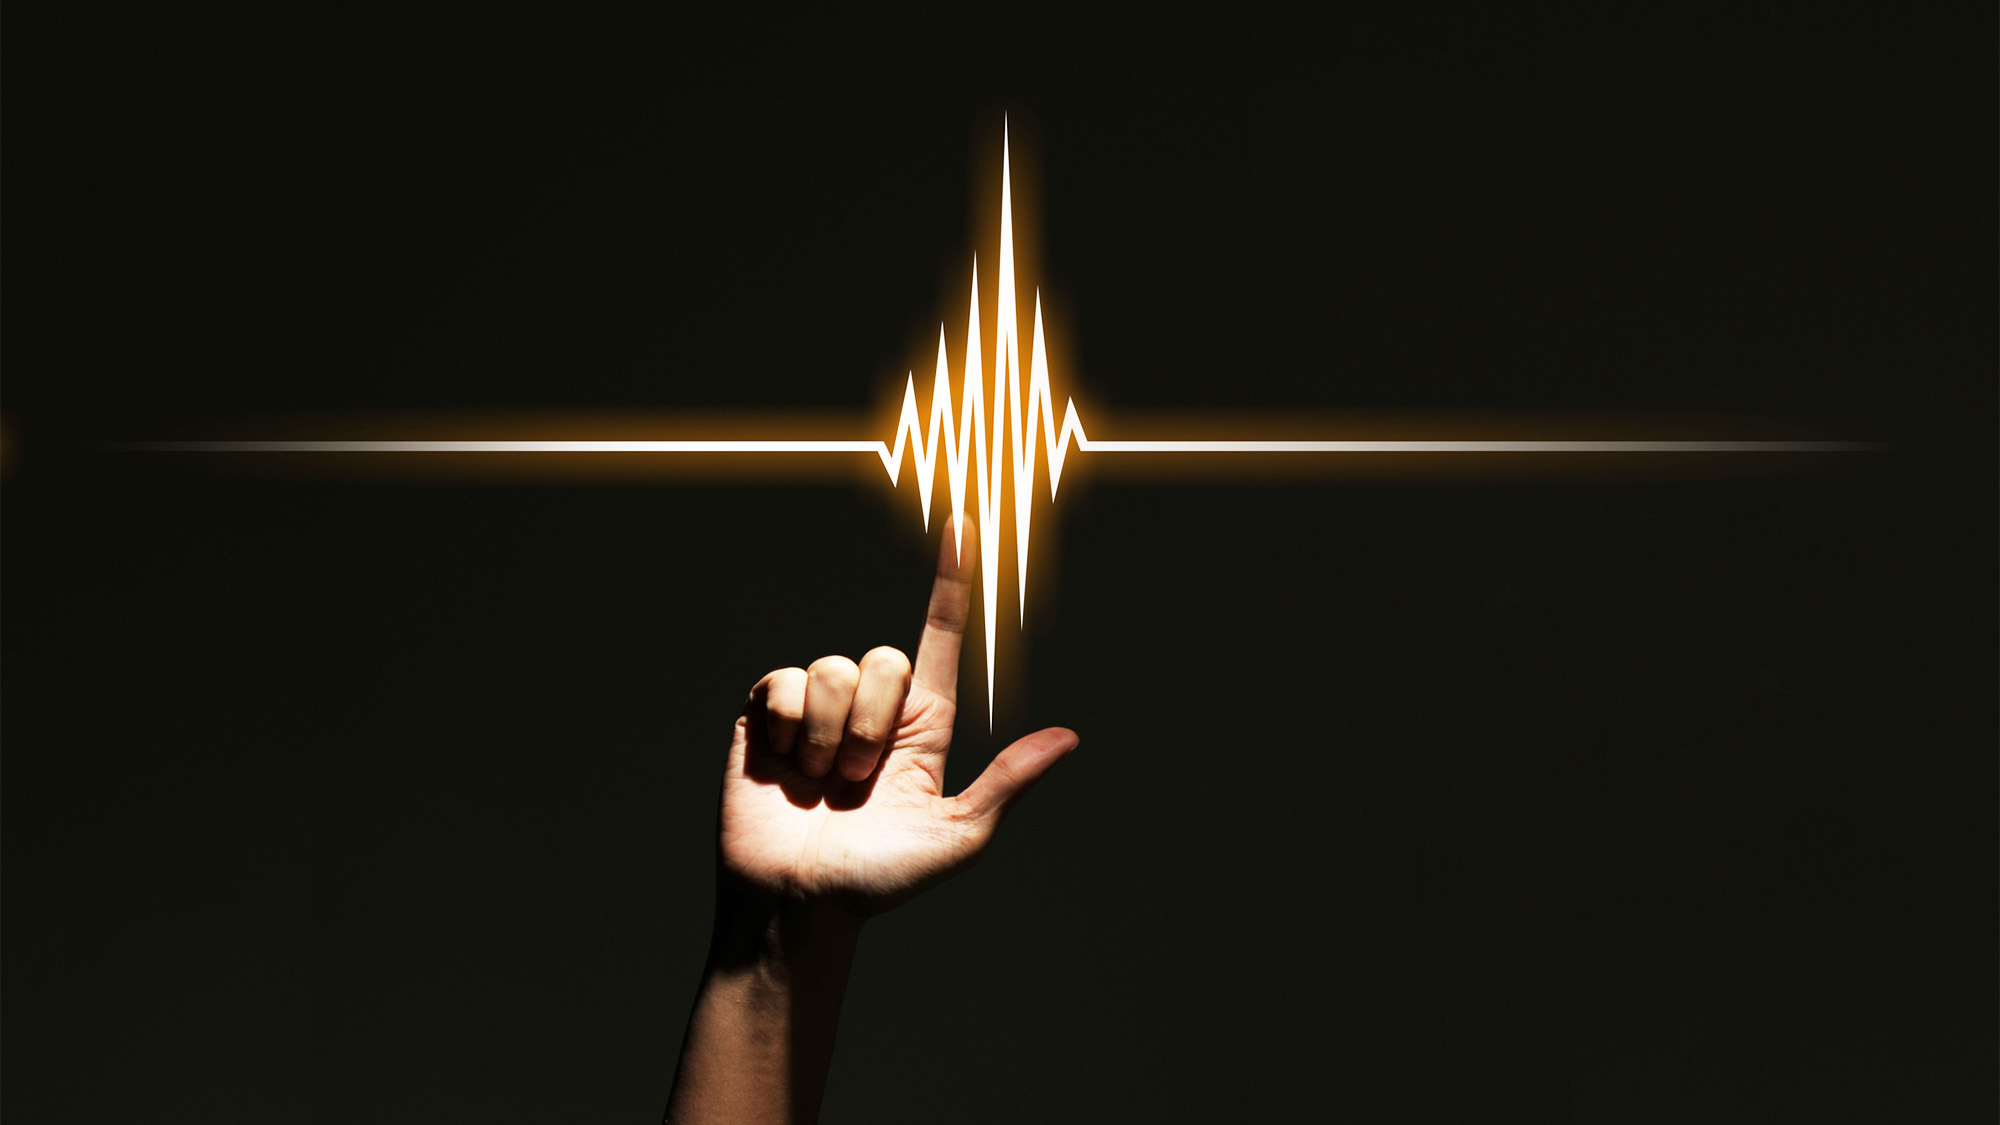 A photoillustration depicts a hand with index finger extended overlaid with the image of a light or soundwave